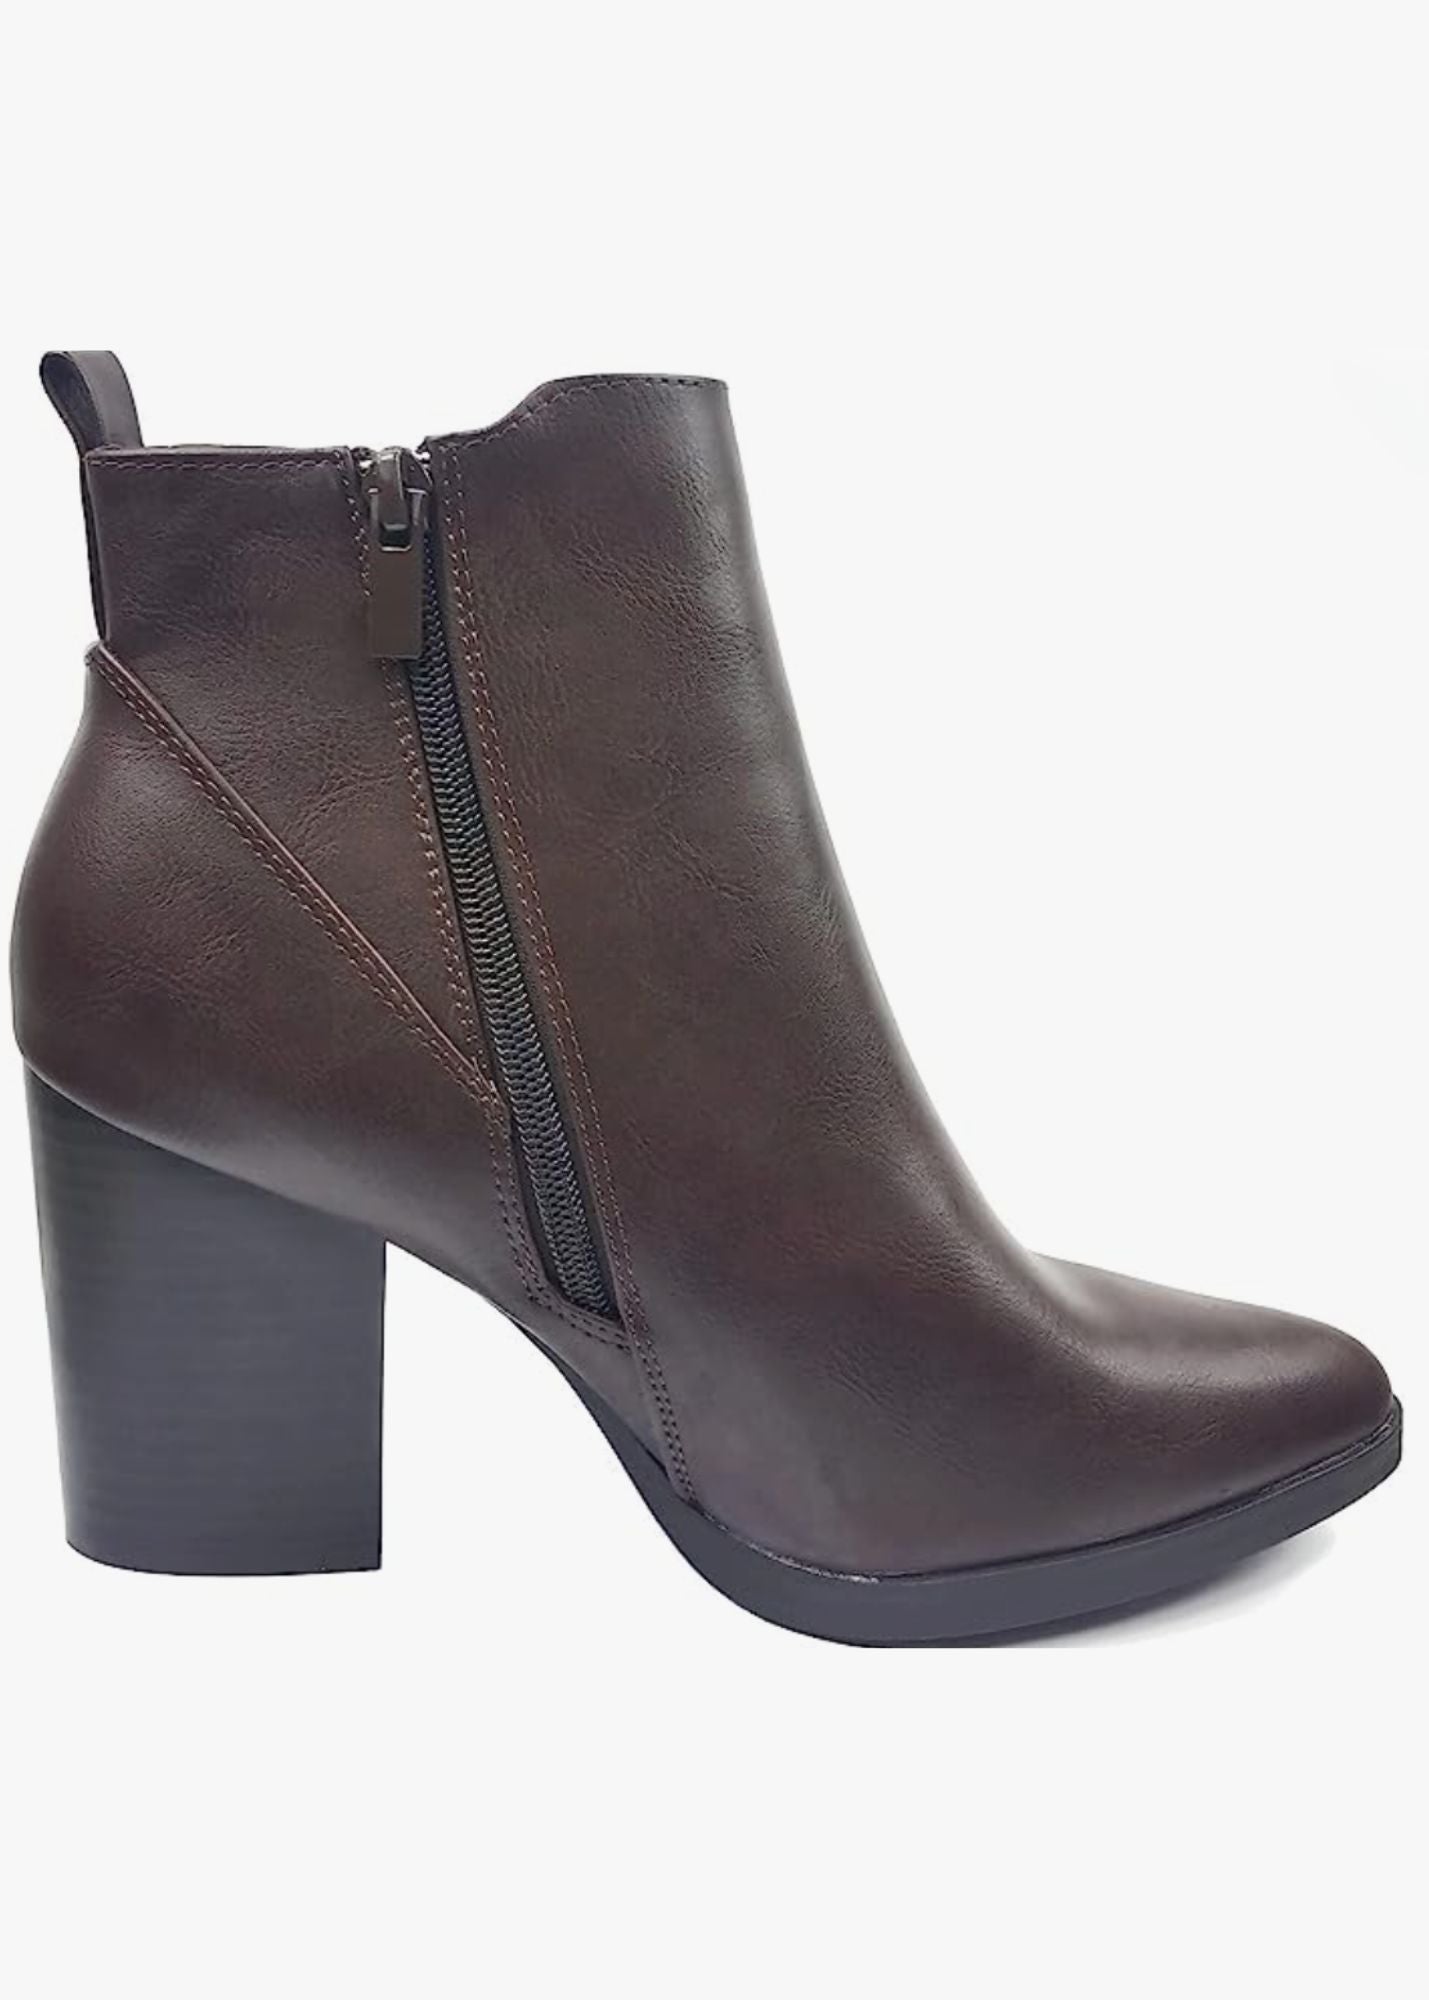 Vegan Leather Heeled Ankle Booties Shoes